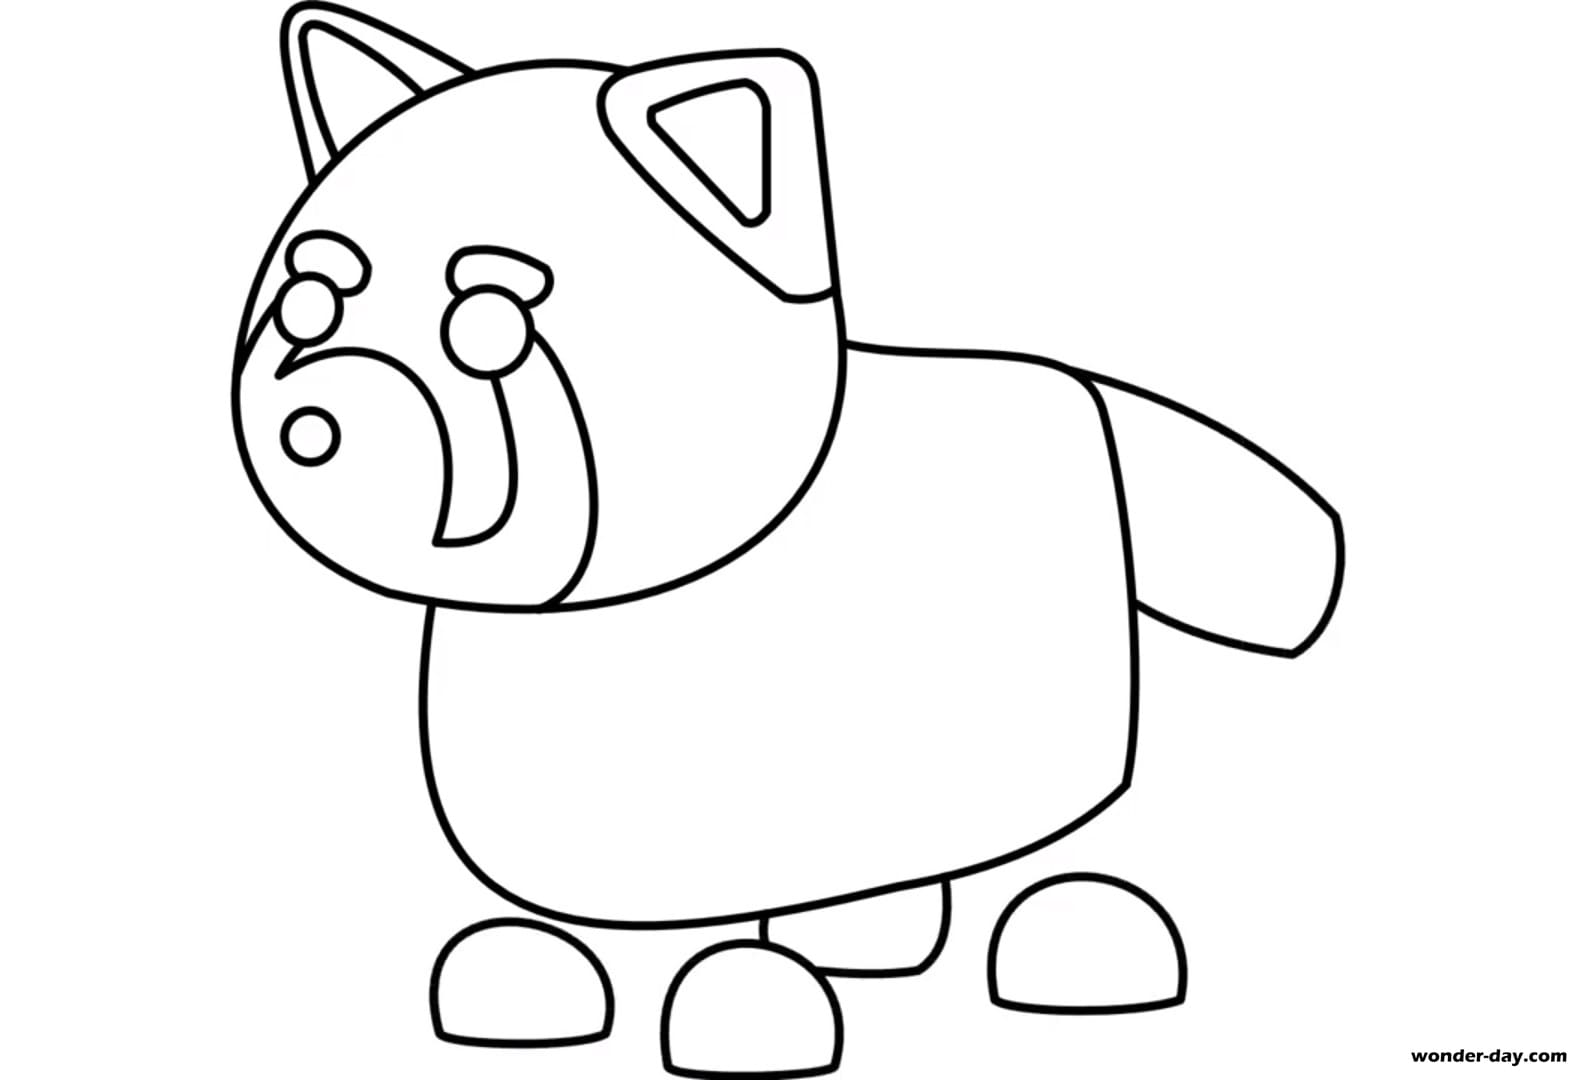 Coloring Pages Adopt Me Print For Free Wonder Day Com - roblox adopt me pets coloring pages panda